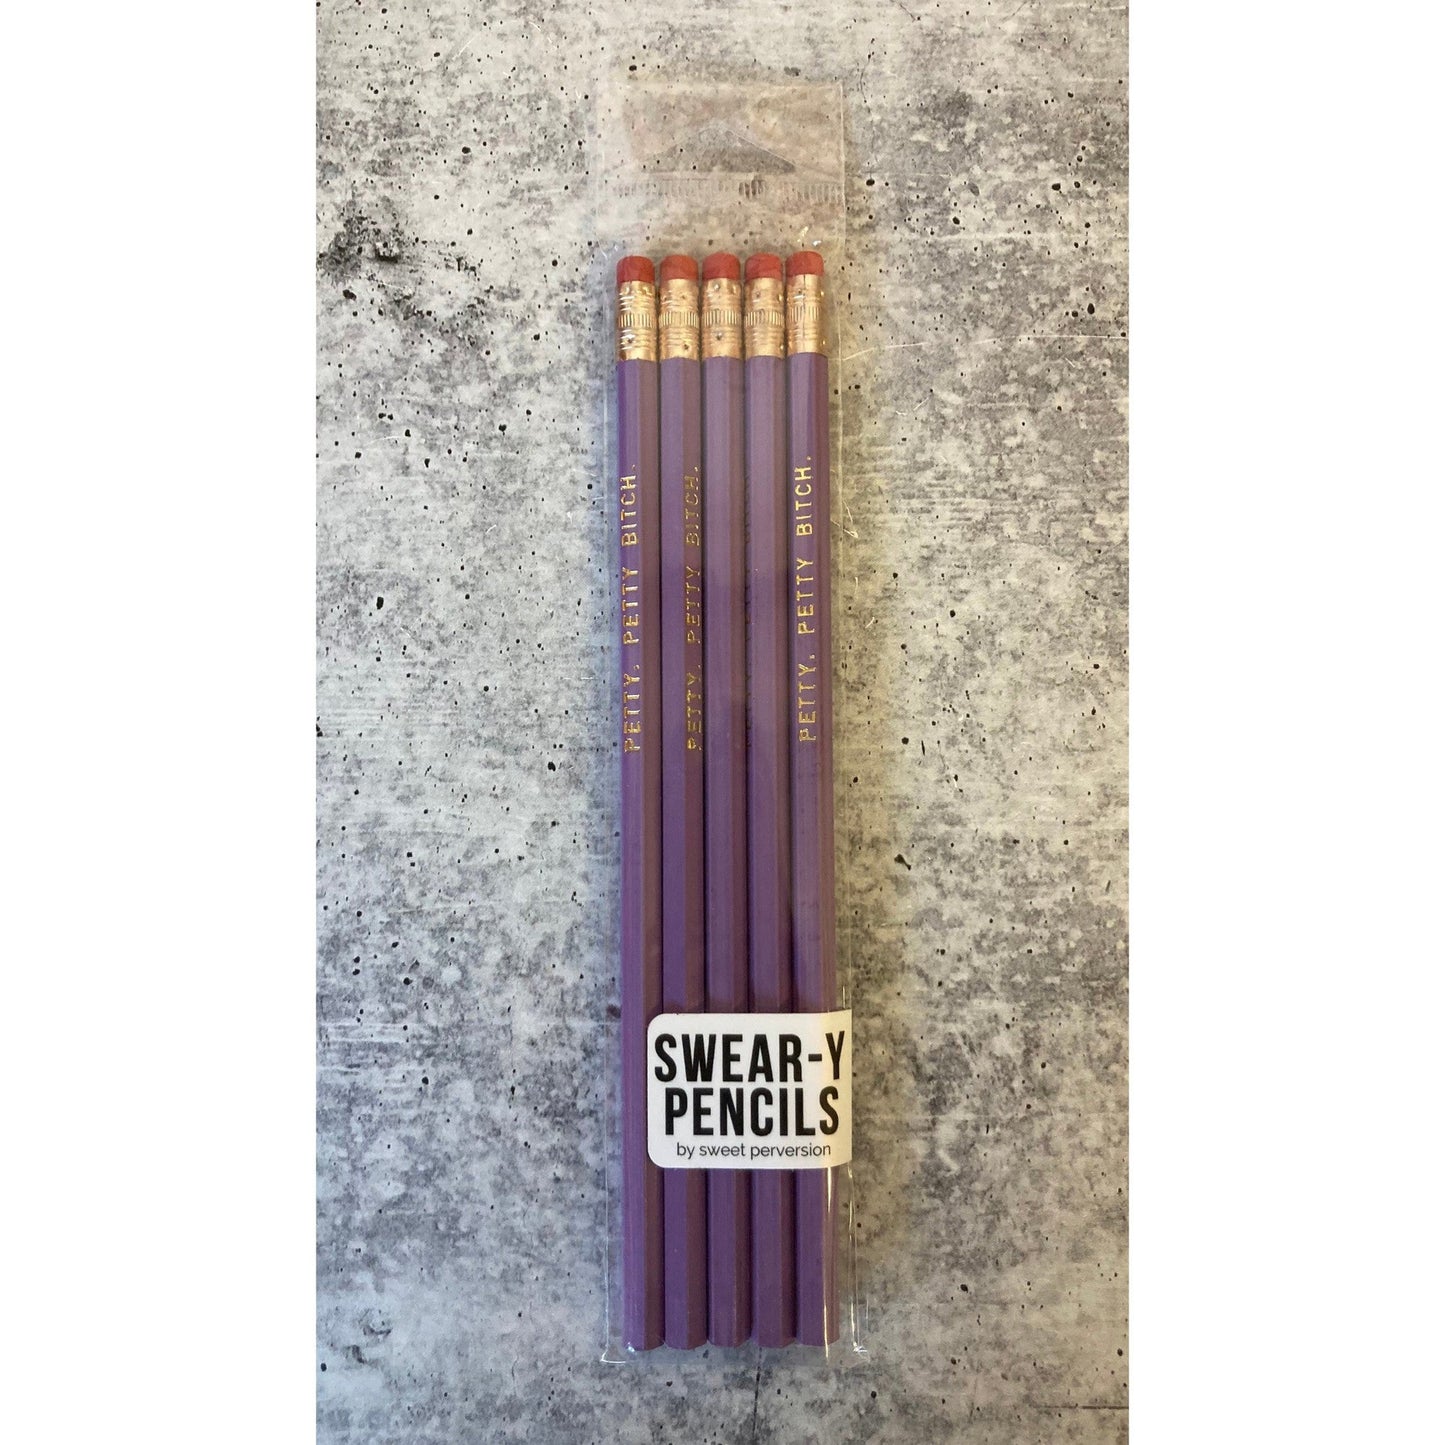 Petty, Petty Bitch Pencil Set in Lilac | Set of 5 Funny Sweary Profanity Pencils